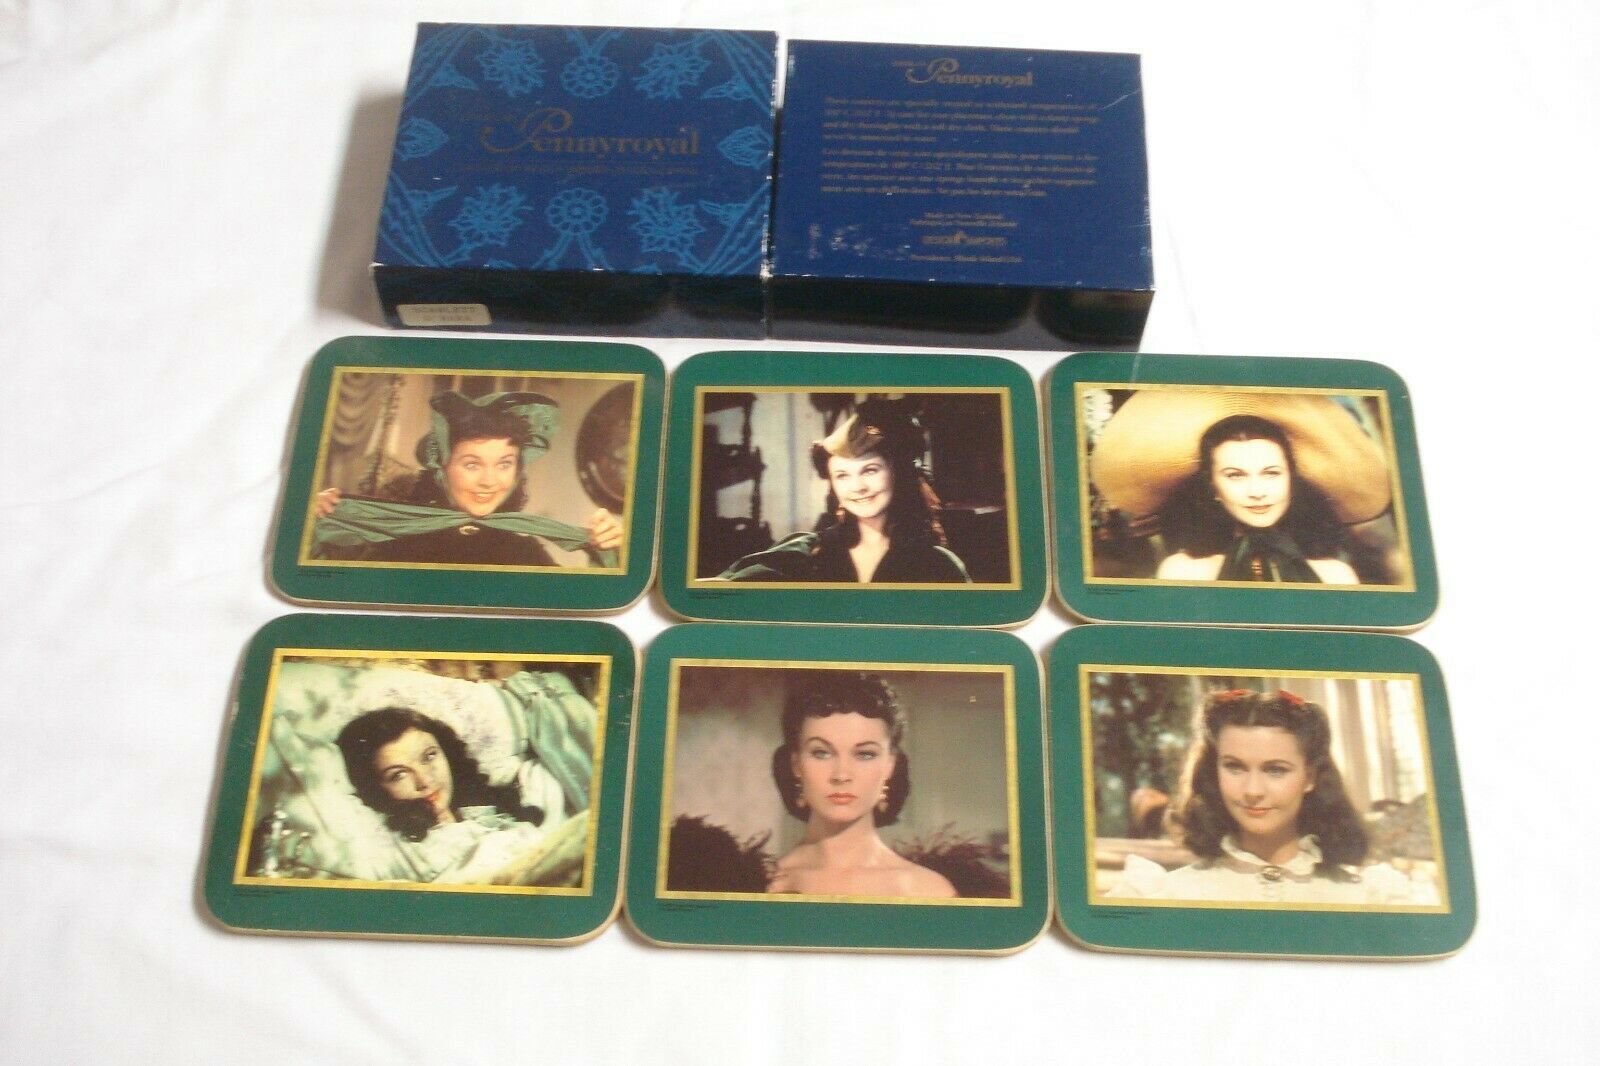 6 Gone With the Wind Scarlett O'Hara Cork Coasters by American Pennyroyal  - $9.99